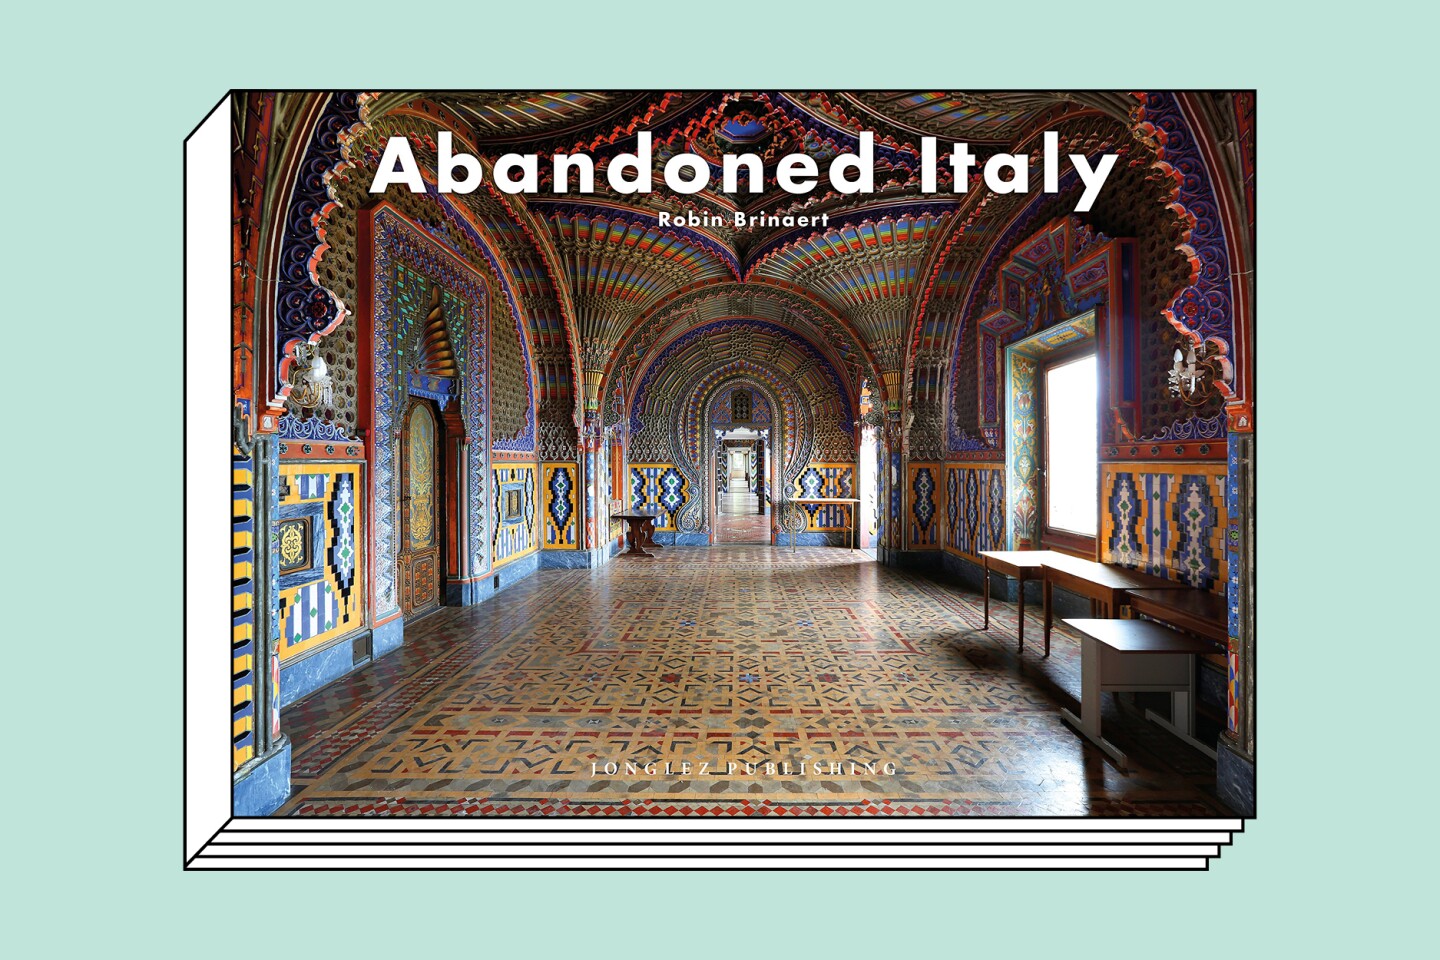 <h2>“Abandoned Italy” by Robin Brinaert (2018)</h2> <ul>   <li><b>Buy now</b>: <a class="Link" href="https://amzn.to/3toM6PF" rel="noopener">amazon.com</a></li>  </ul> <p>For eight years, Robin Brinaert has traveled Italy seeking abandoned places, the skeletons of buildings much more modern than the Colosseum. This photo book showcases the results of this quest, revealing places throughout Italy—a duchess’s hunting lodge, an old <i>Pinocchio</i> film set, a former asylum—and uncovering backstories that allow readers to see Italian ruins through a different lens.</p> <h2>“The Stones of Florence” by Mary McCarthy (1959)</h2> <ul>   <li><b>Buy now</b>: <a class="Link" href="https://bookshop.org/p/books/the-stones-of-florence-mary-mccarthy/6683930?ean=9780156027632" rel="noopener nofollow sponsored">bookshop.org</a></li>  </ul> <p>This singular history is not a new book, but its subject is timeless. And you may well wish you had visited the city some 60 years ago before it became overrun by tourists. Not that Florence has ever lacked for admiring visitors. Try to get a hold of the illustrated edition published later. <i>Stones of Florence</i> began as a long essay in <i>The New Yorker</i>; it has gone on to become a classic of insight about its famous city.</p> <p><i>This article was originally published in 2018 and most recently updated on December 19, 2023, with current information.</i></p>